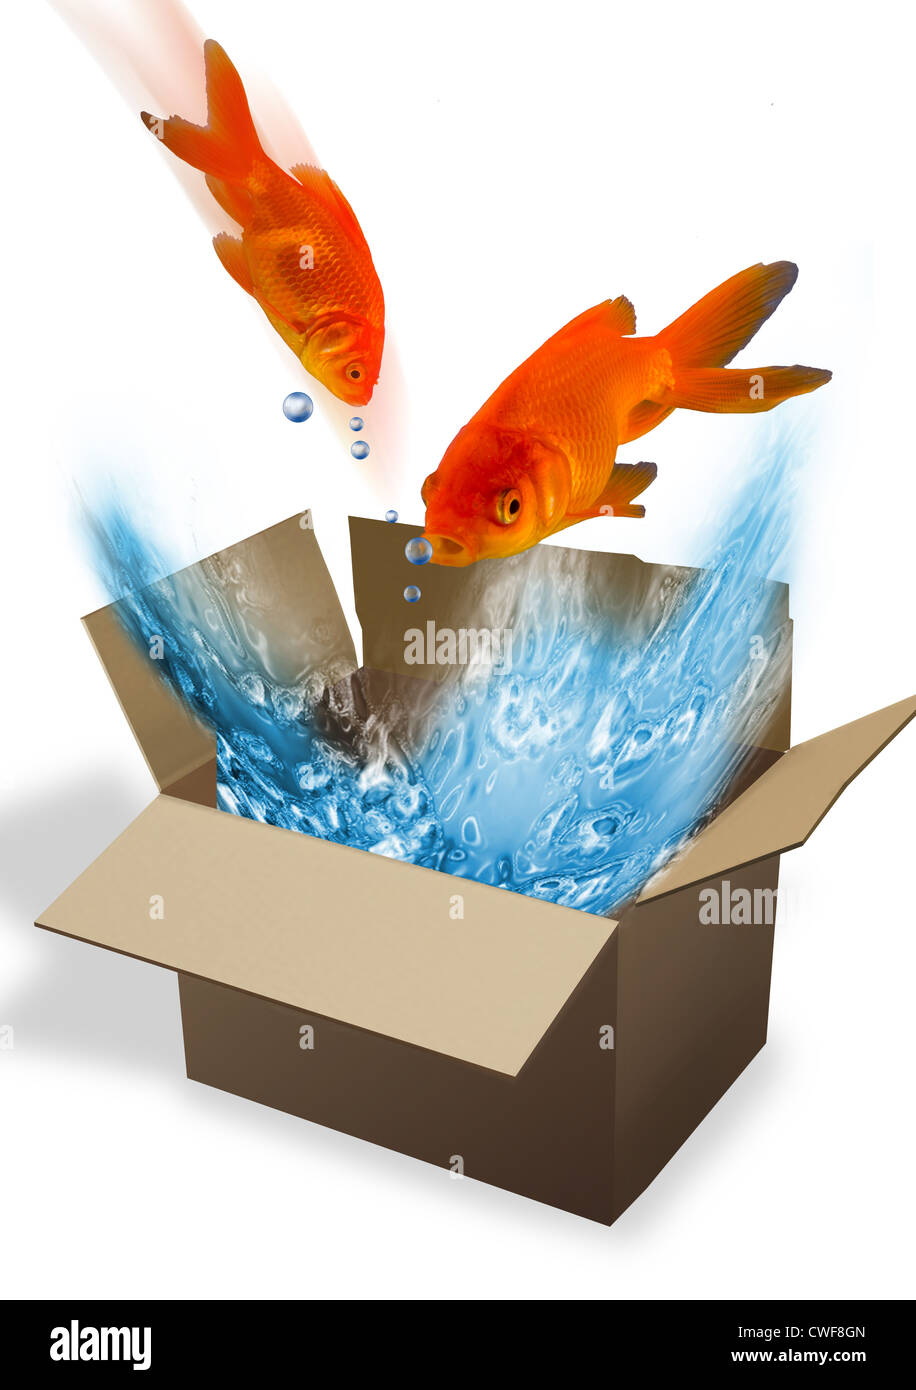 Goldfish jumping out of the box. Stock Photo